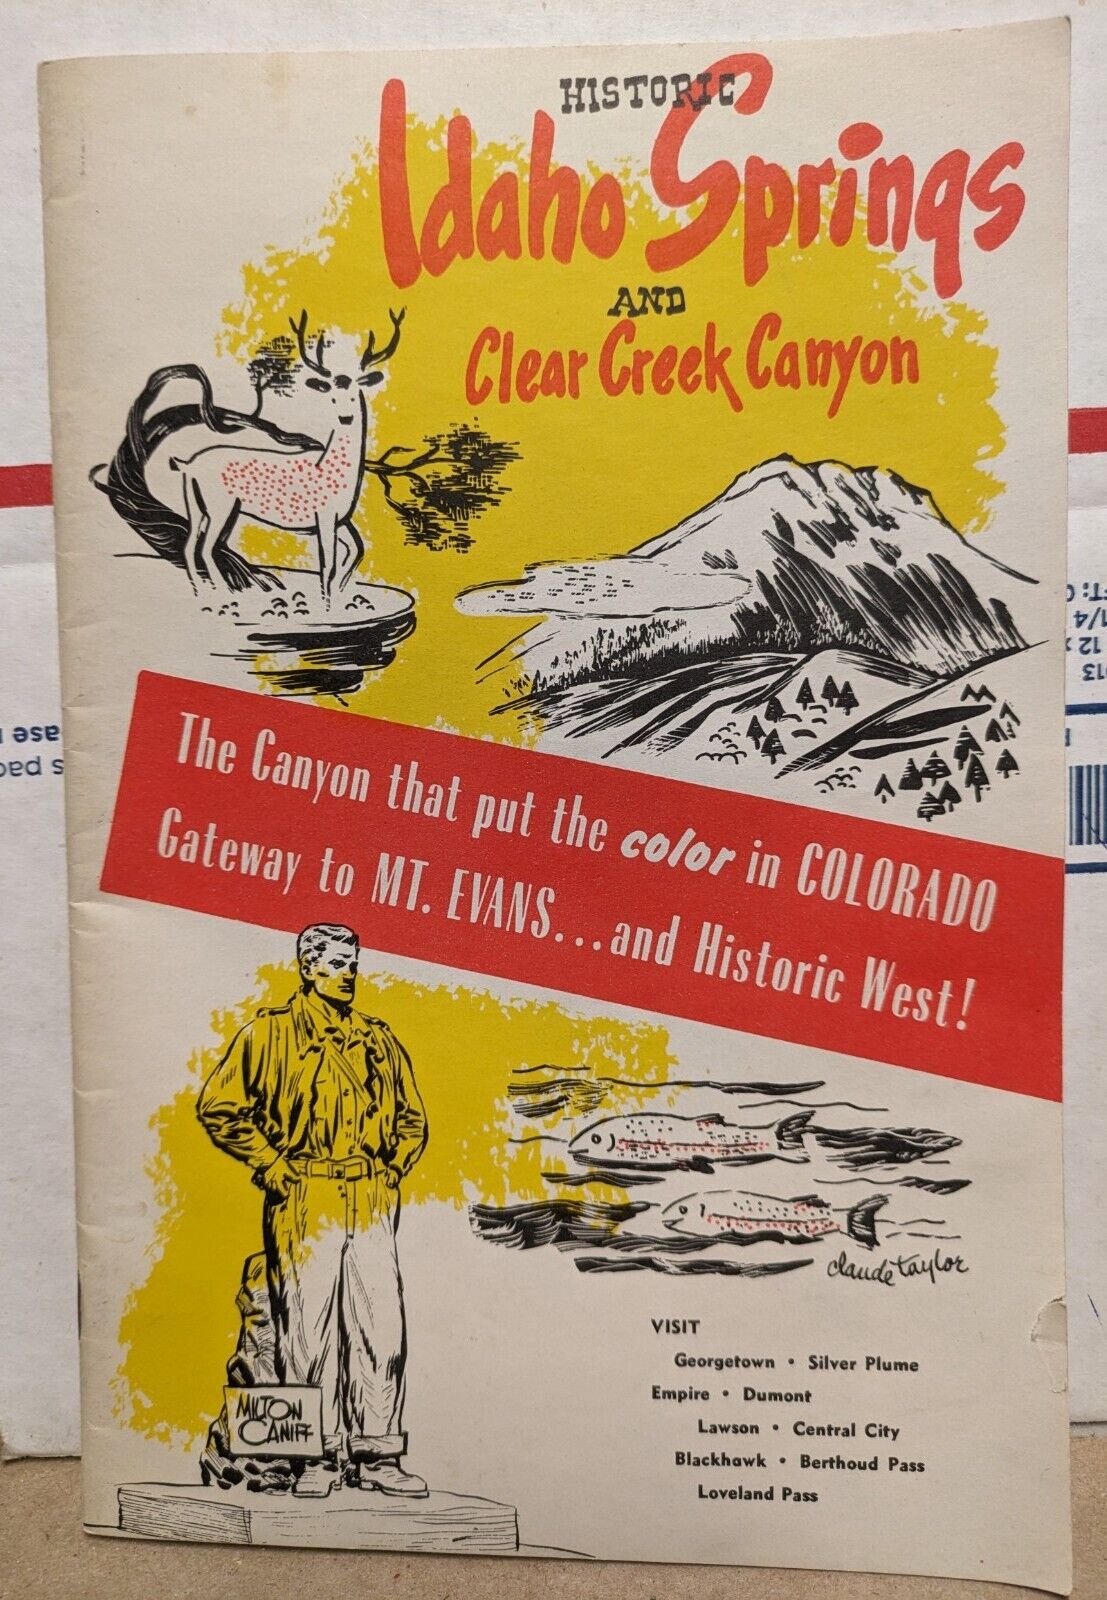 1951 Historic Idaho Springs/Clear Creek Canyon Colorado CO Tourism Booklet ADS